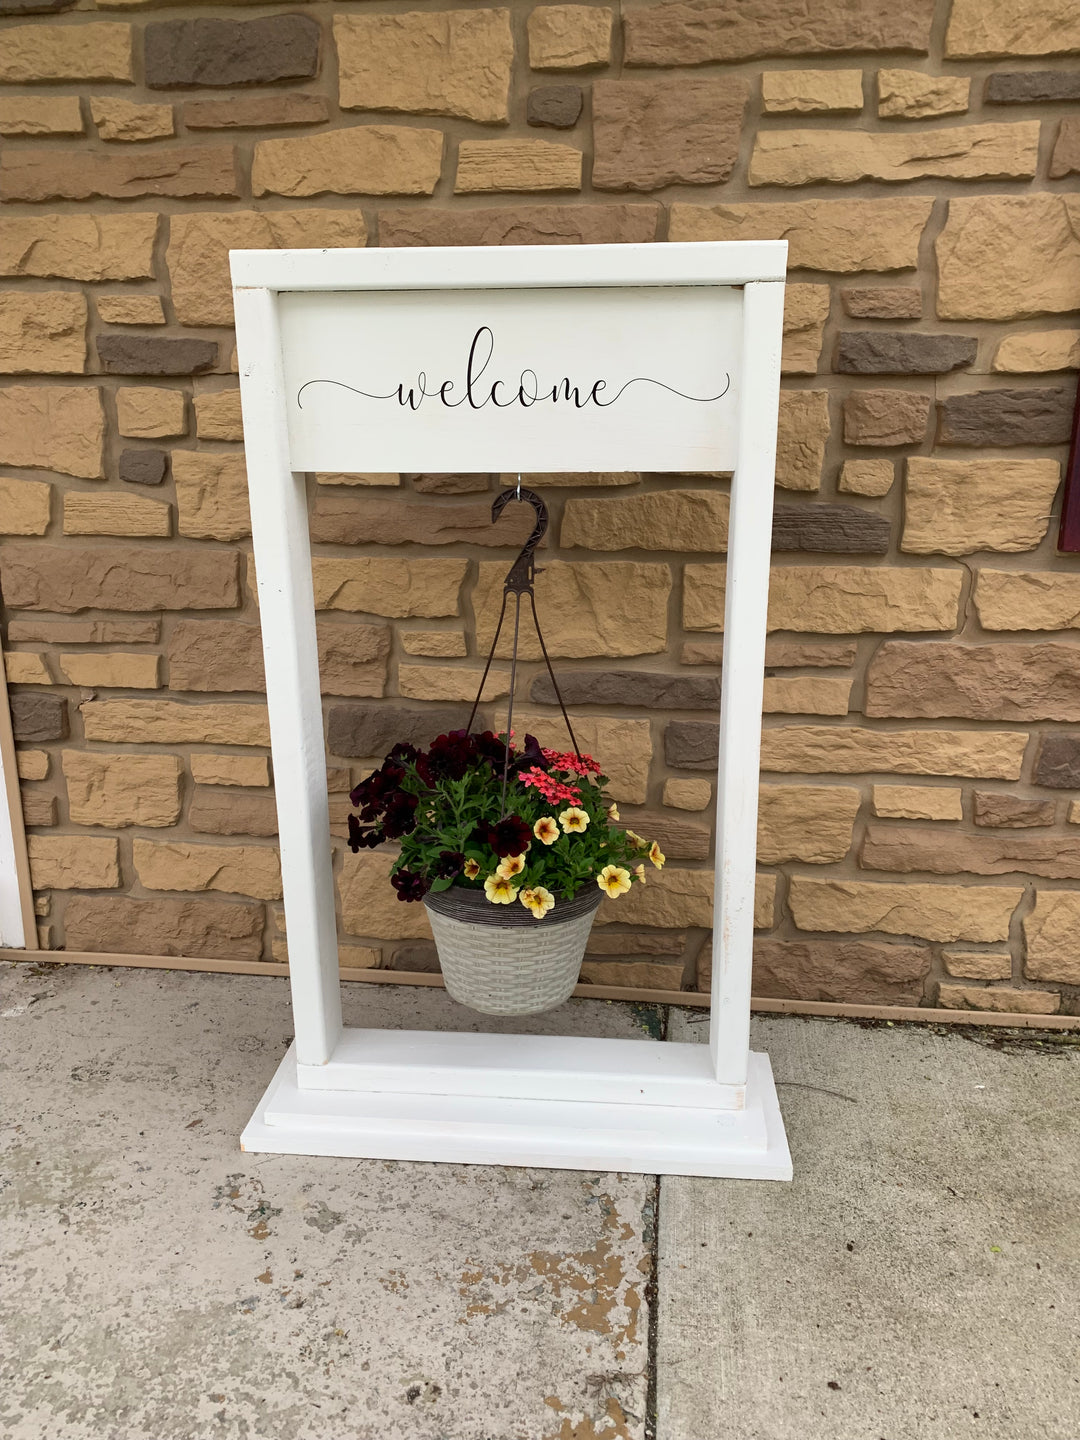 Hanging Flower Basket Stand Class Saturday, May 18th @ 11am